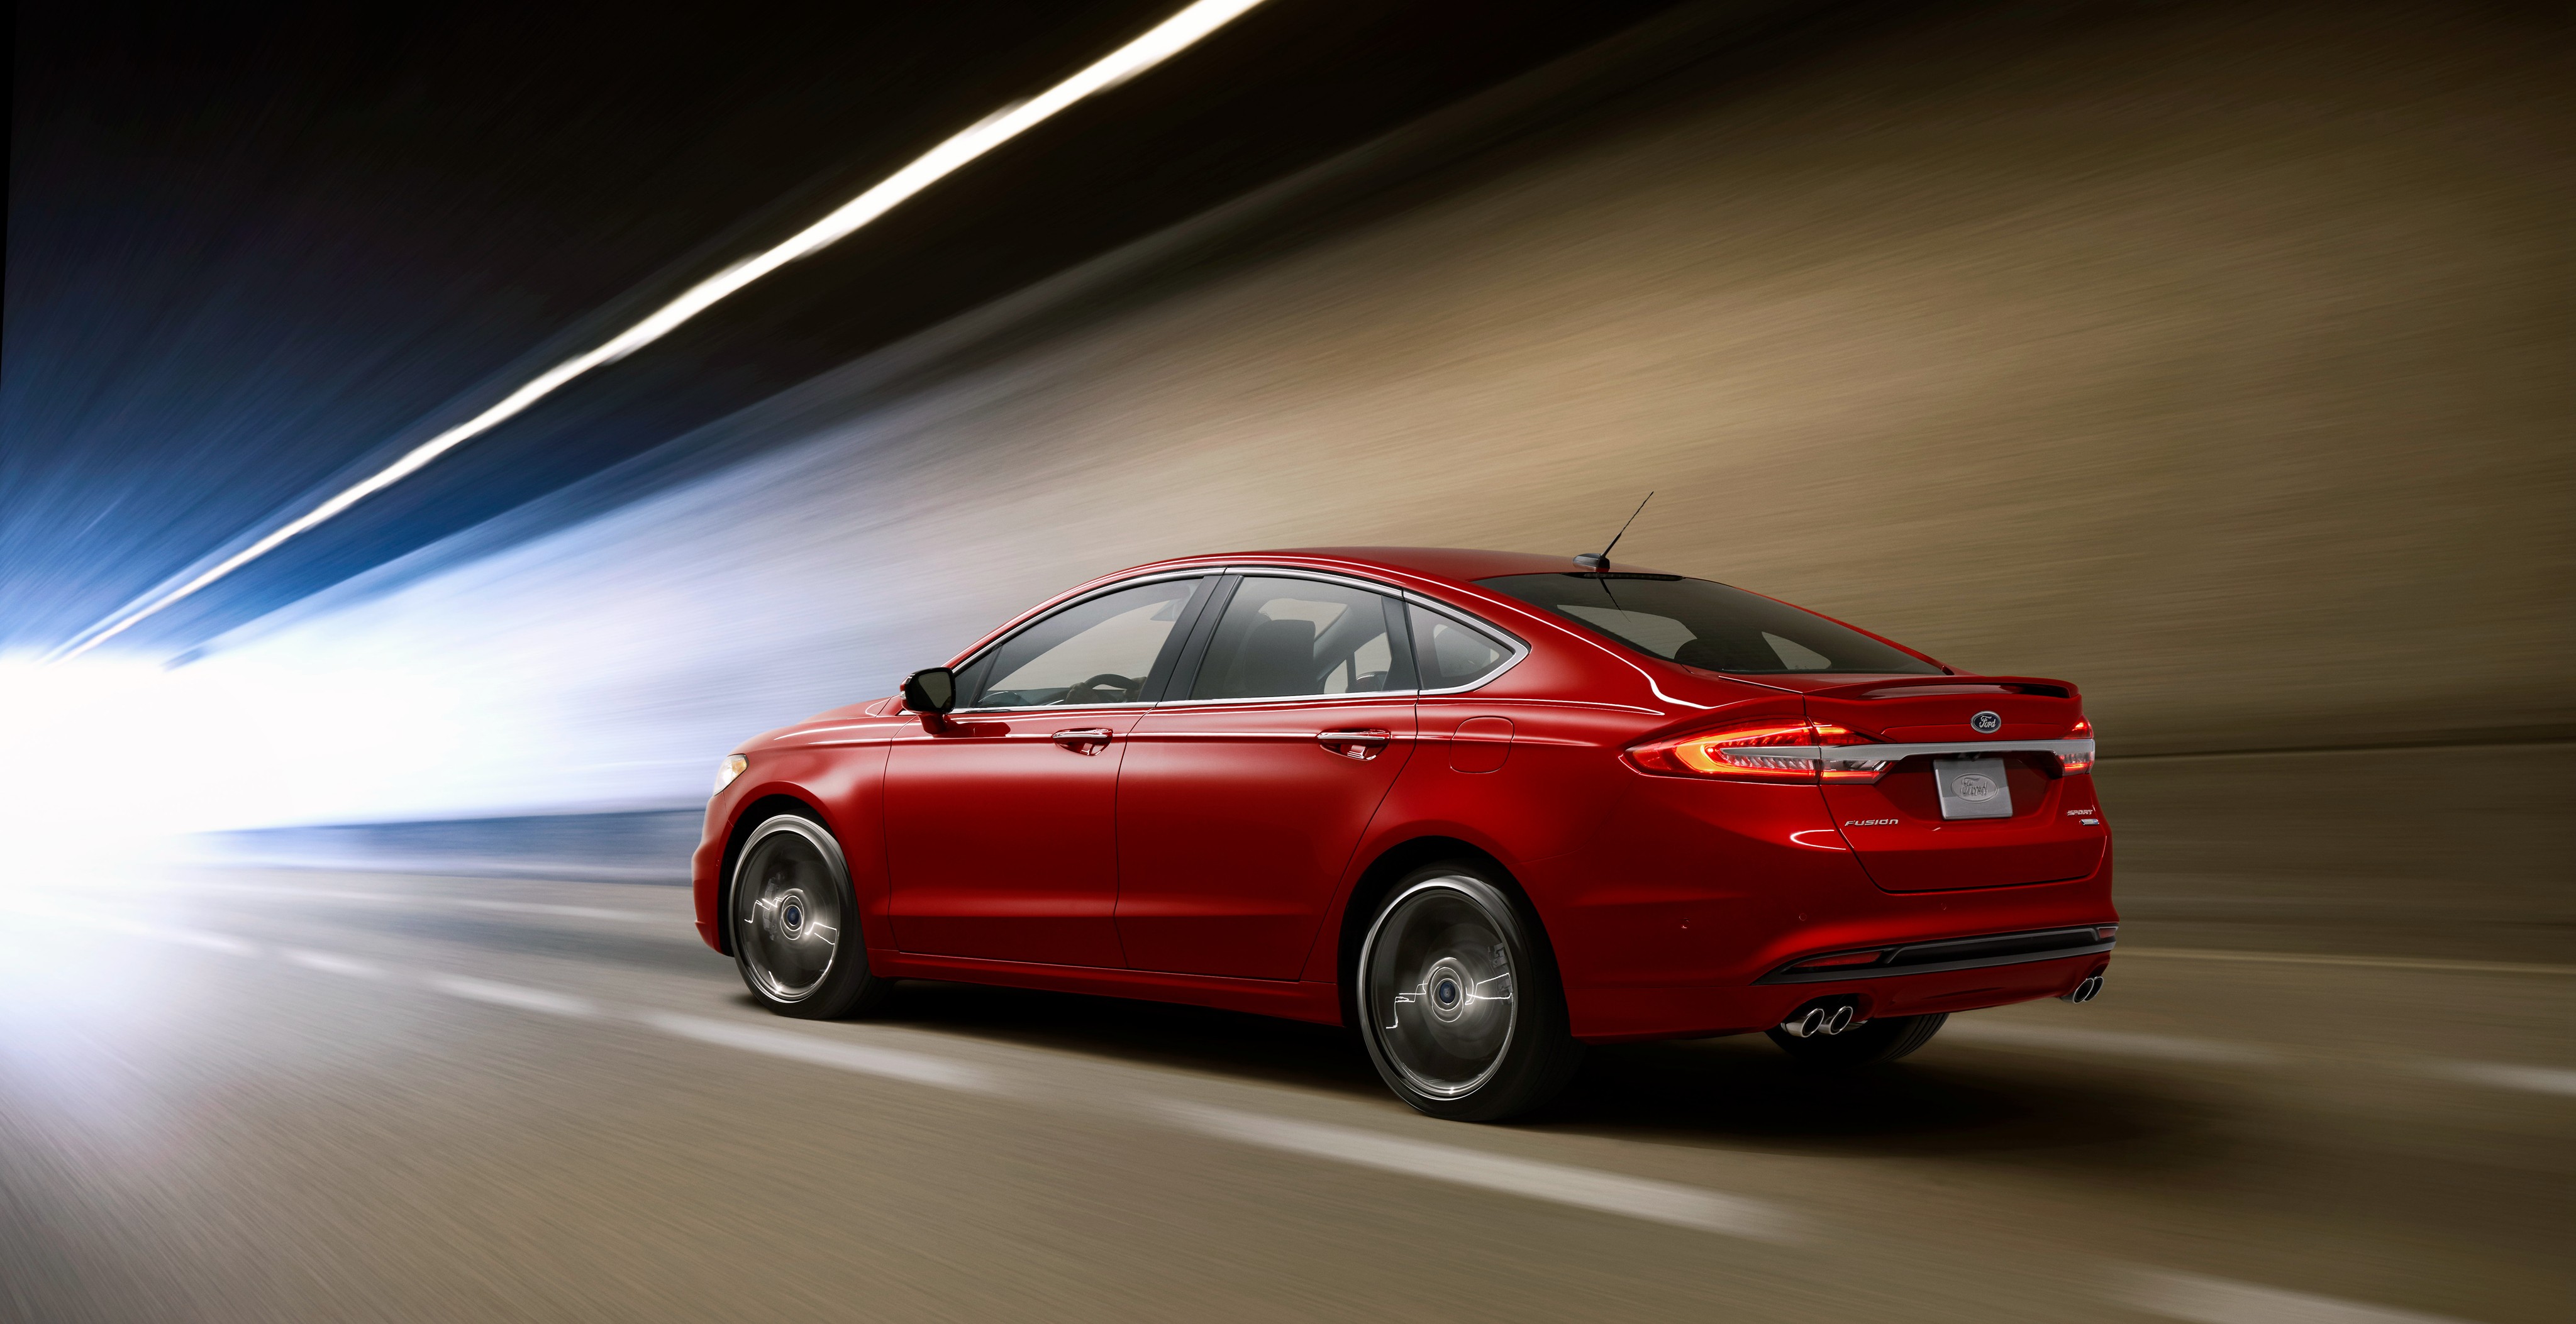 2020 Ford Fusion Redesign Cancelled, Declining Sales Are To Blame